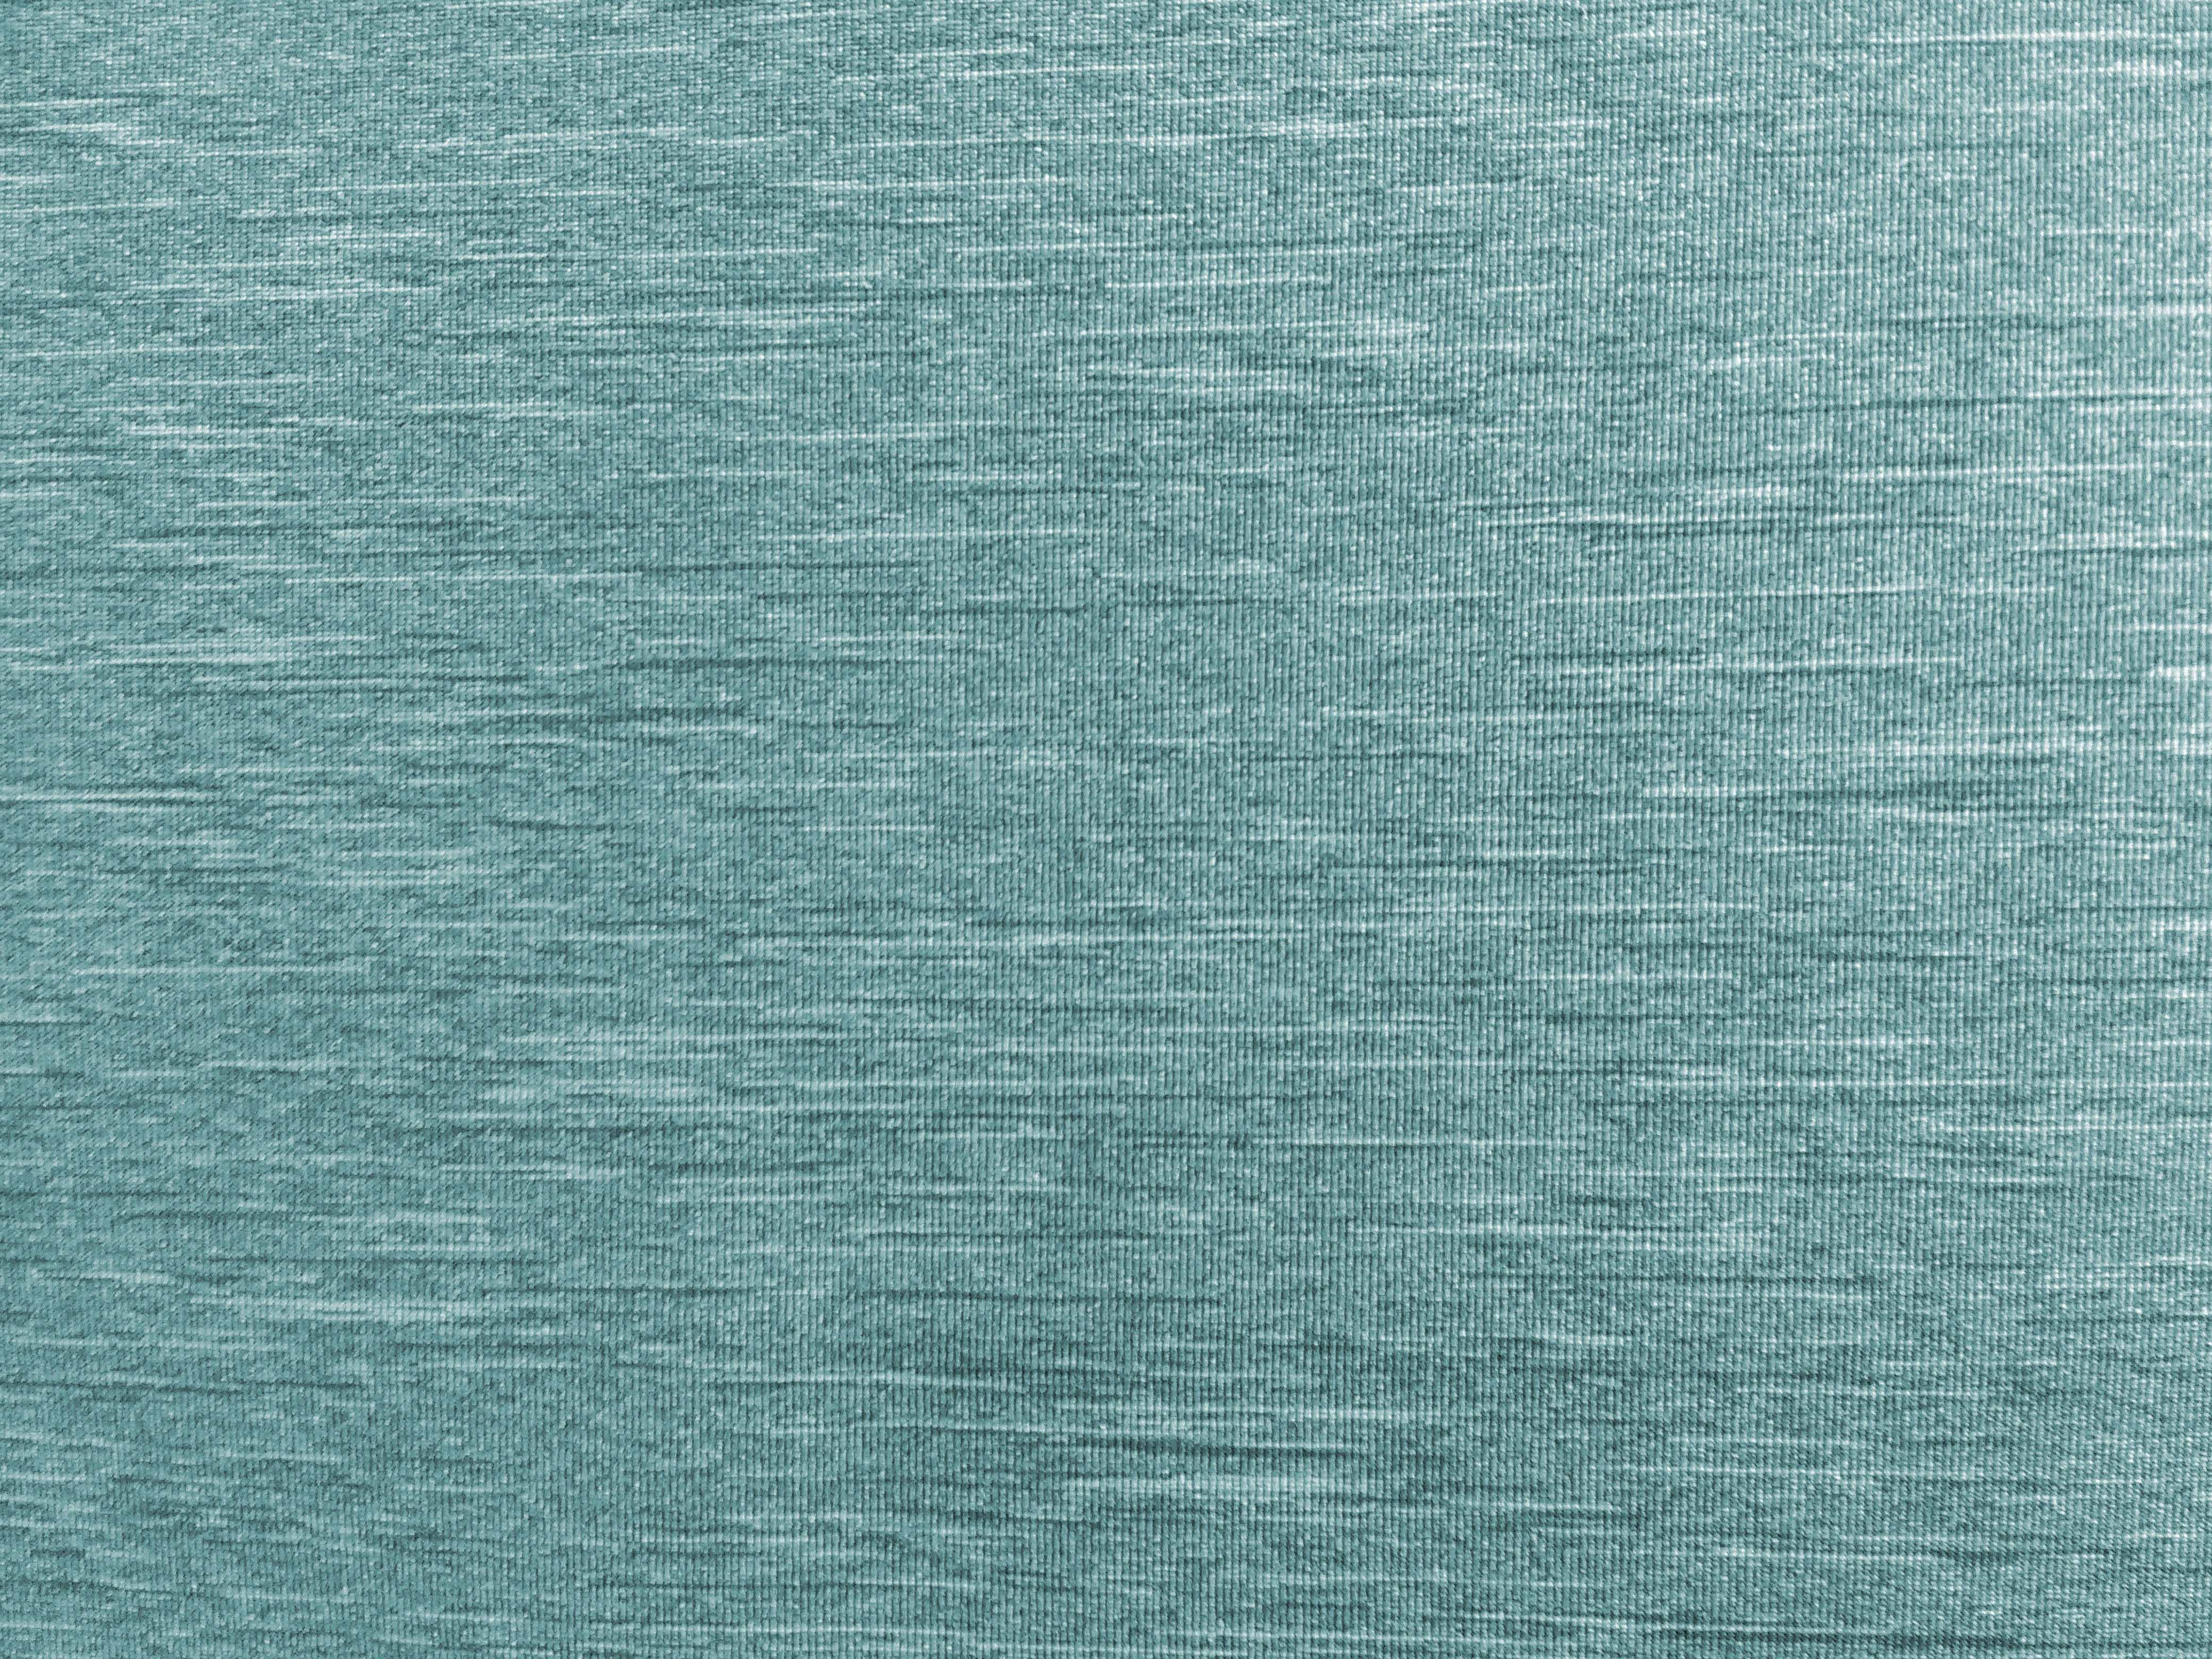 Teal Variegated Knit Fabric Texture Picture Free Photograph Photos